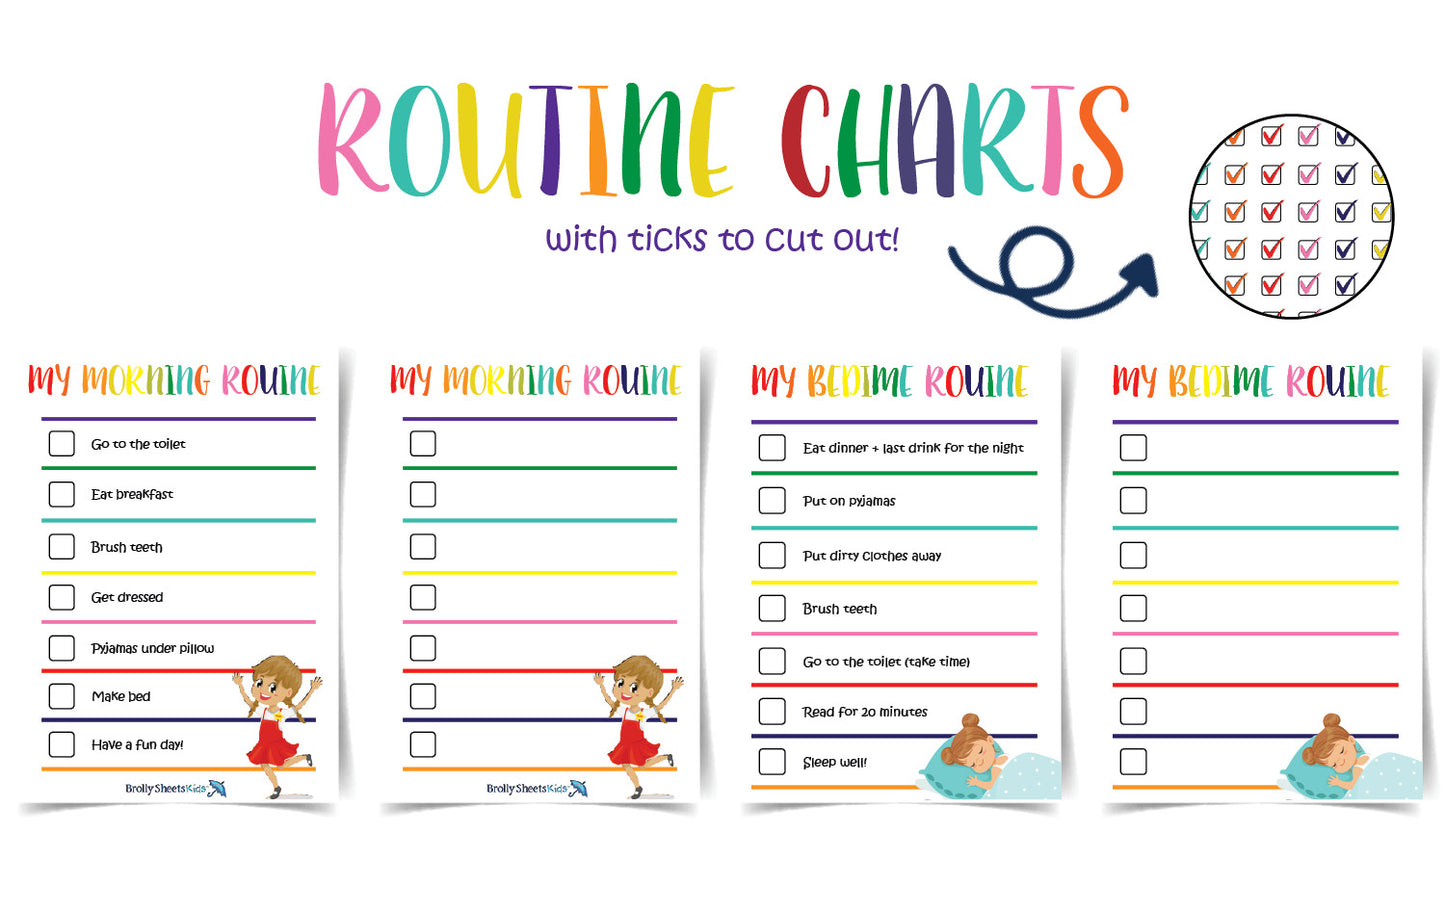 Routine Checklists - Brolly Sheets NZ